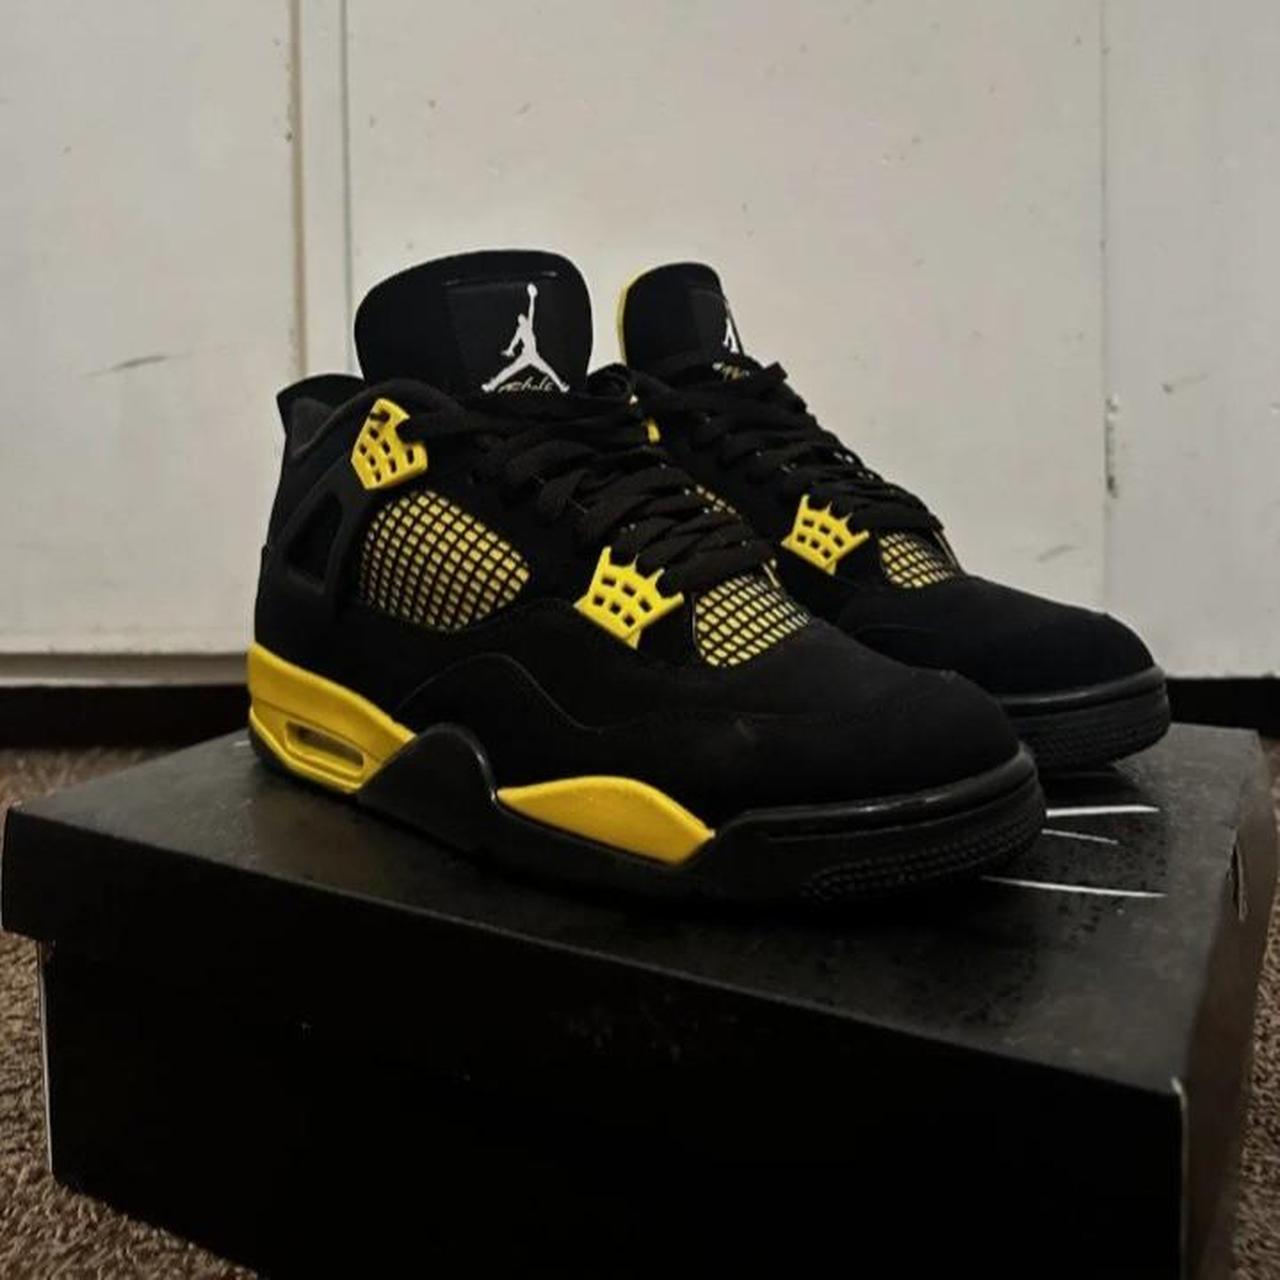 Jordan 4s (Yellow Thunders) All Sizes Available for... - Depop